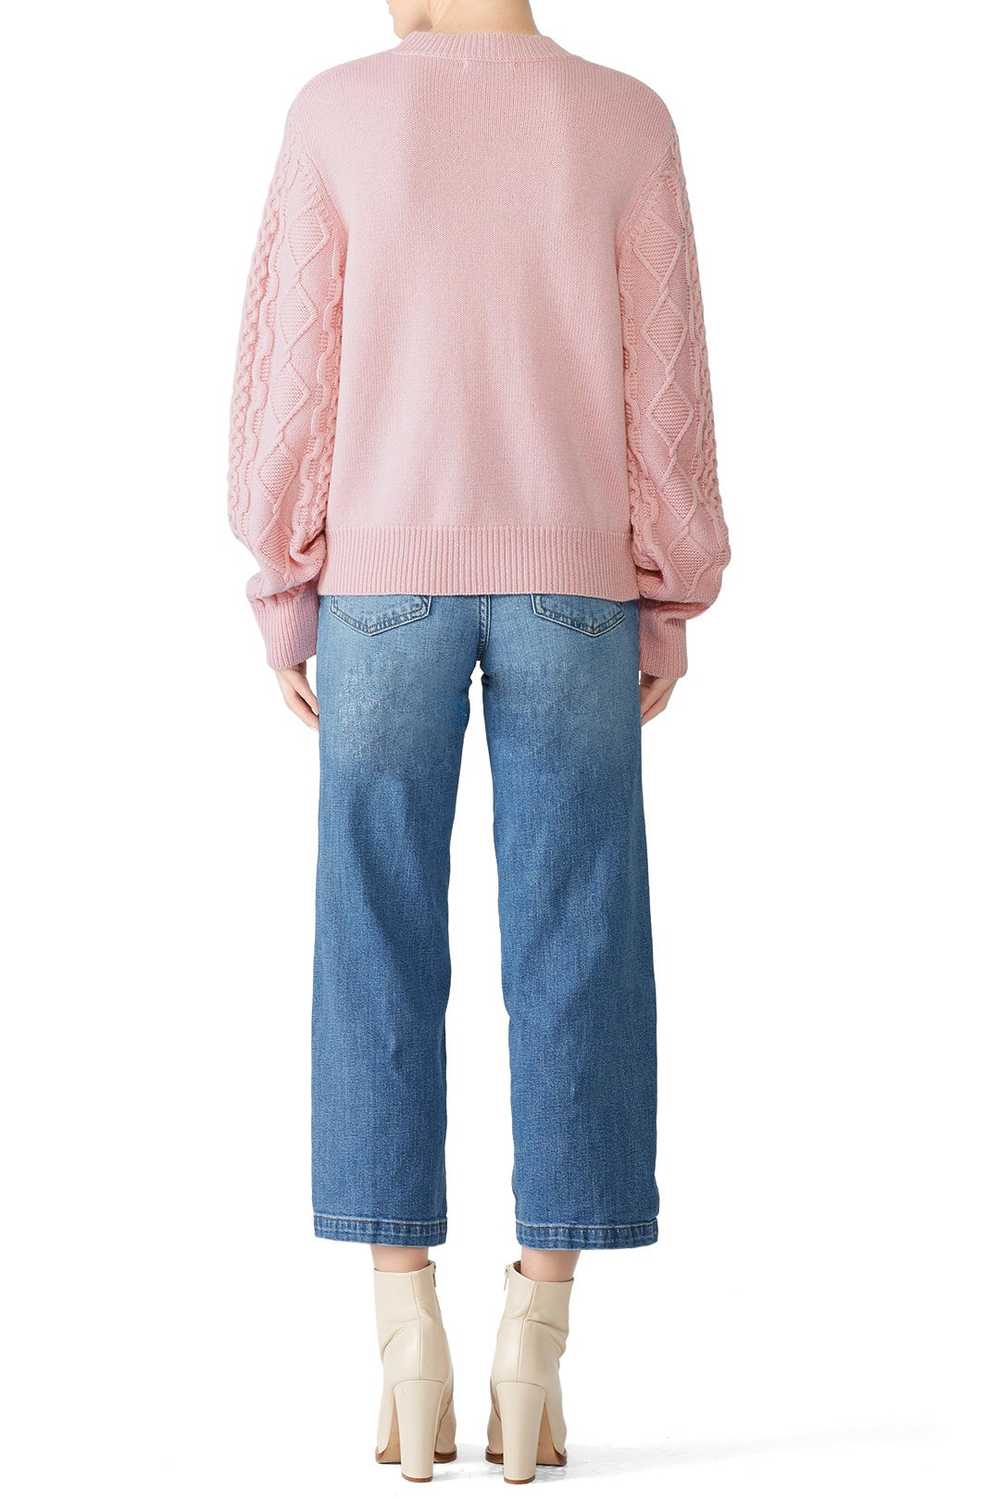 Rebecca Minkoff Pink Penny Cable Sweater - image 2